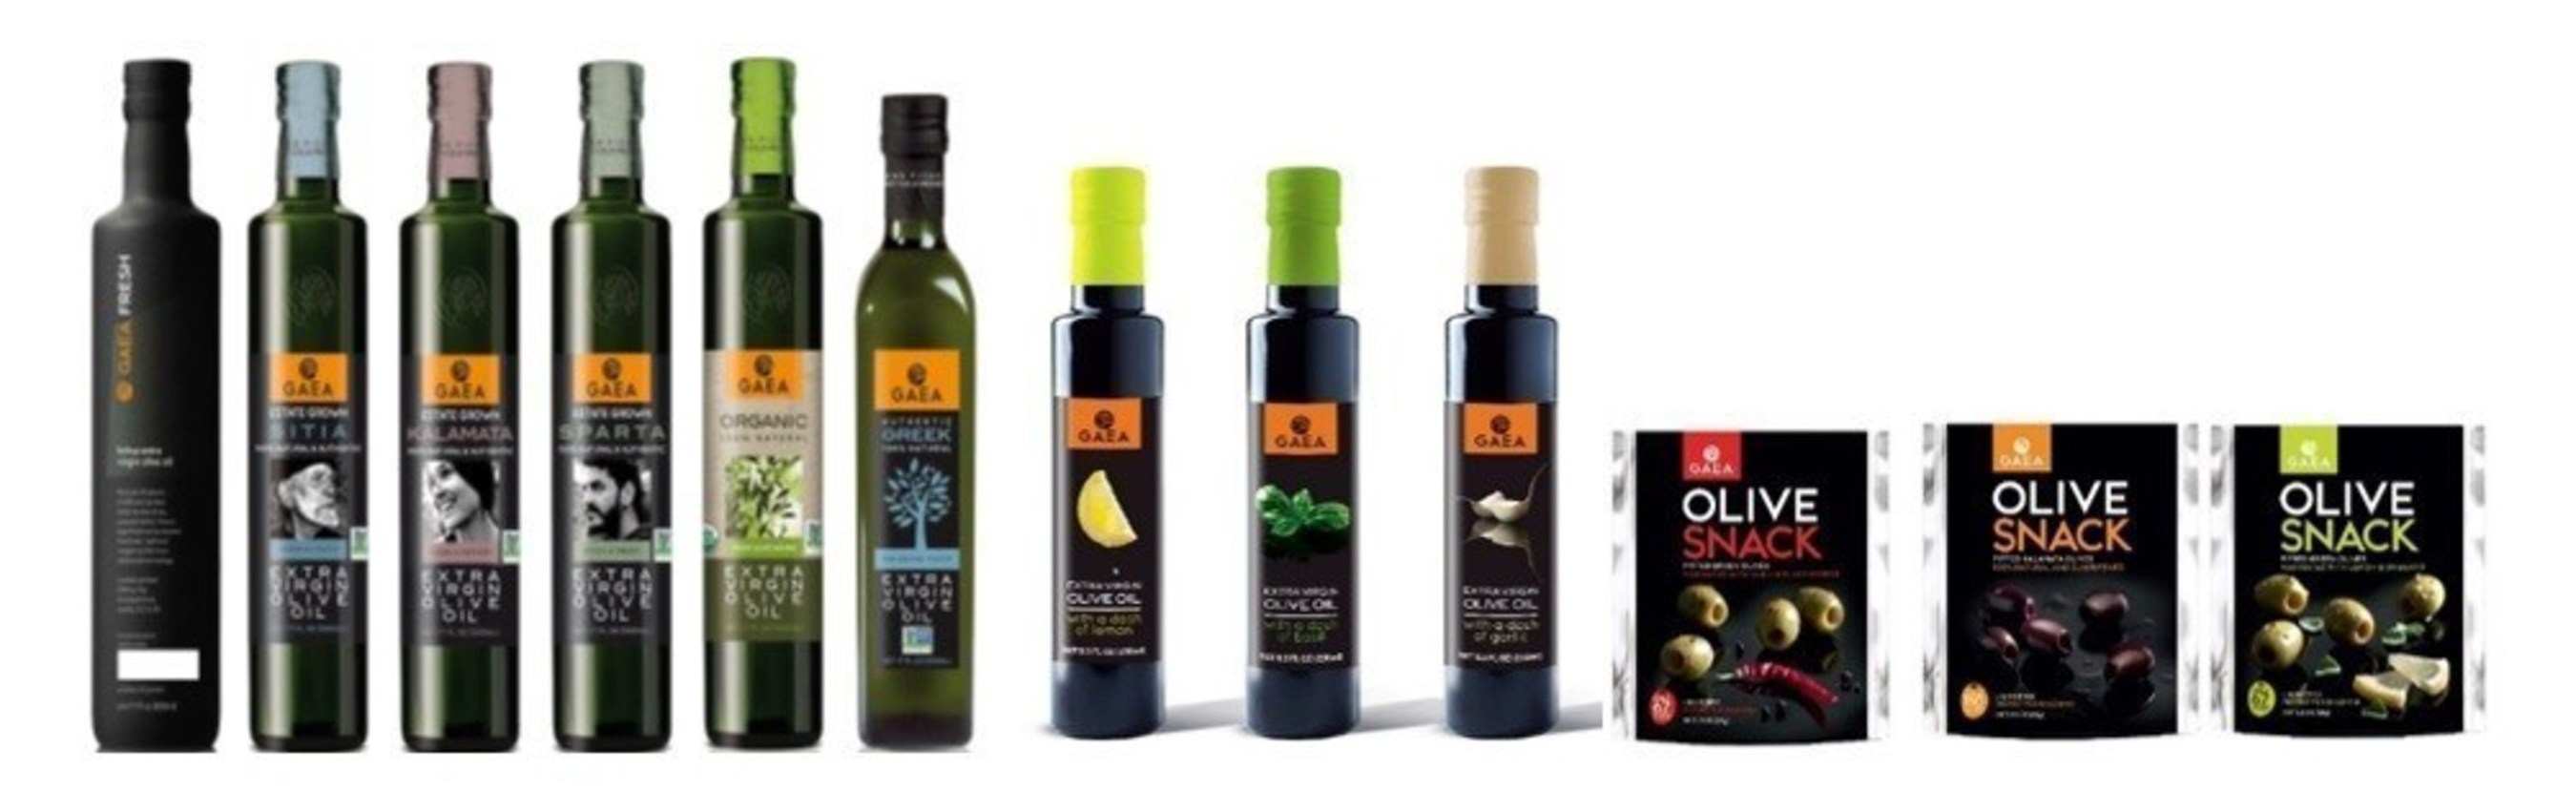 Gaea Launches New Olive Oil and Olive Pack Line